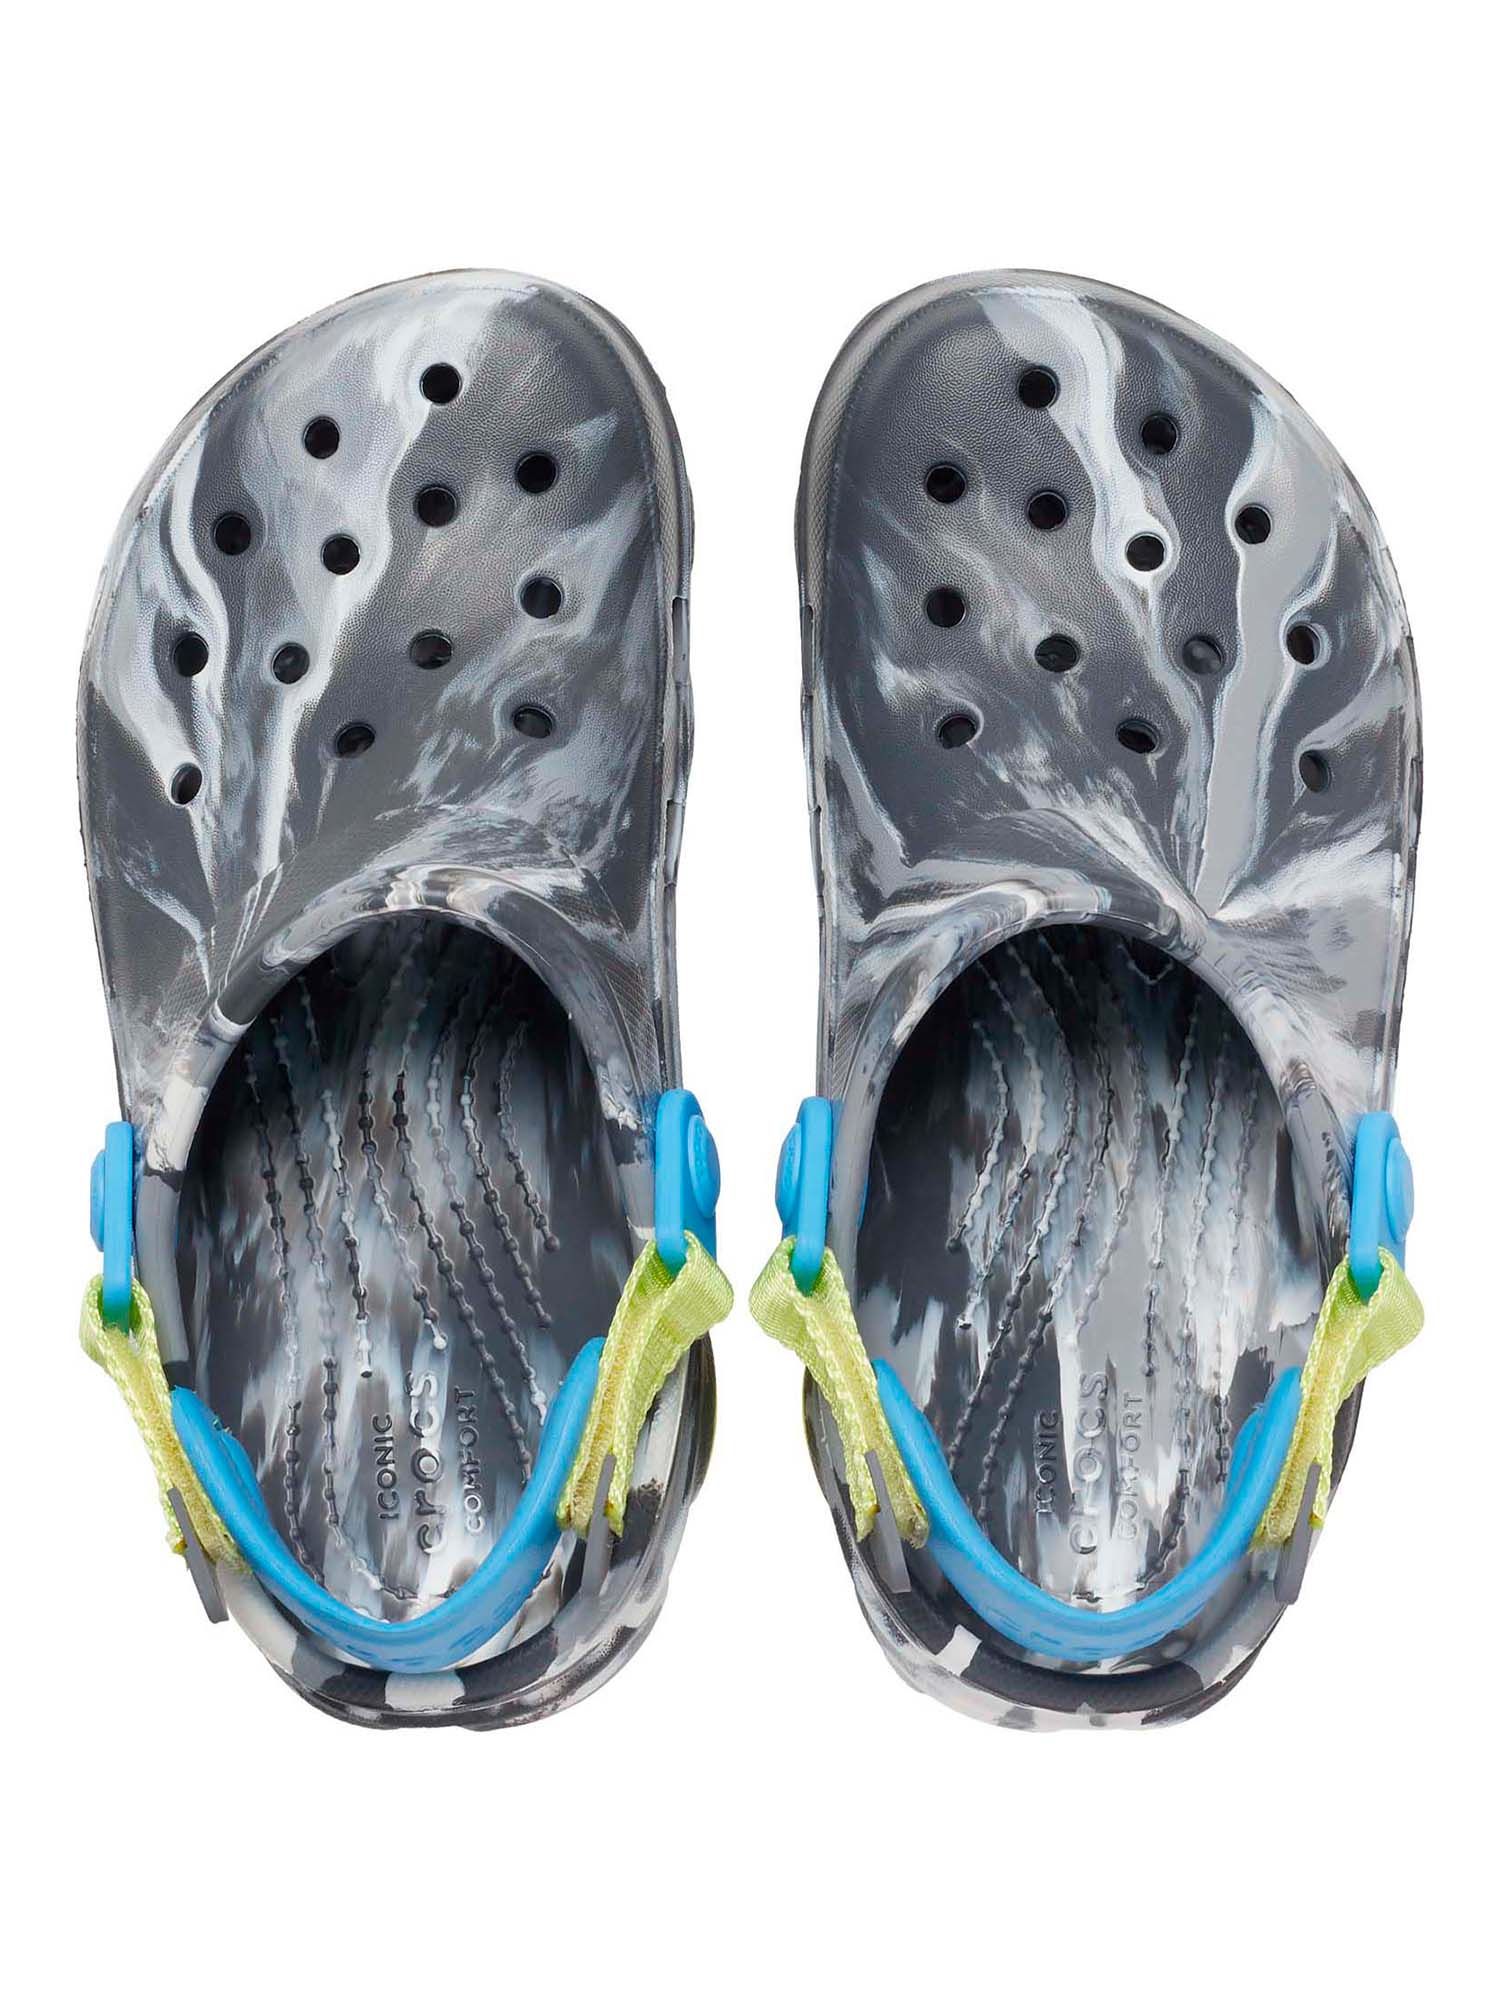 Crocs Toddler Classic All-Terrain Marbled Clog - image 3 of 6